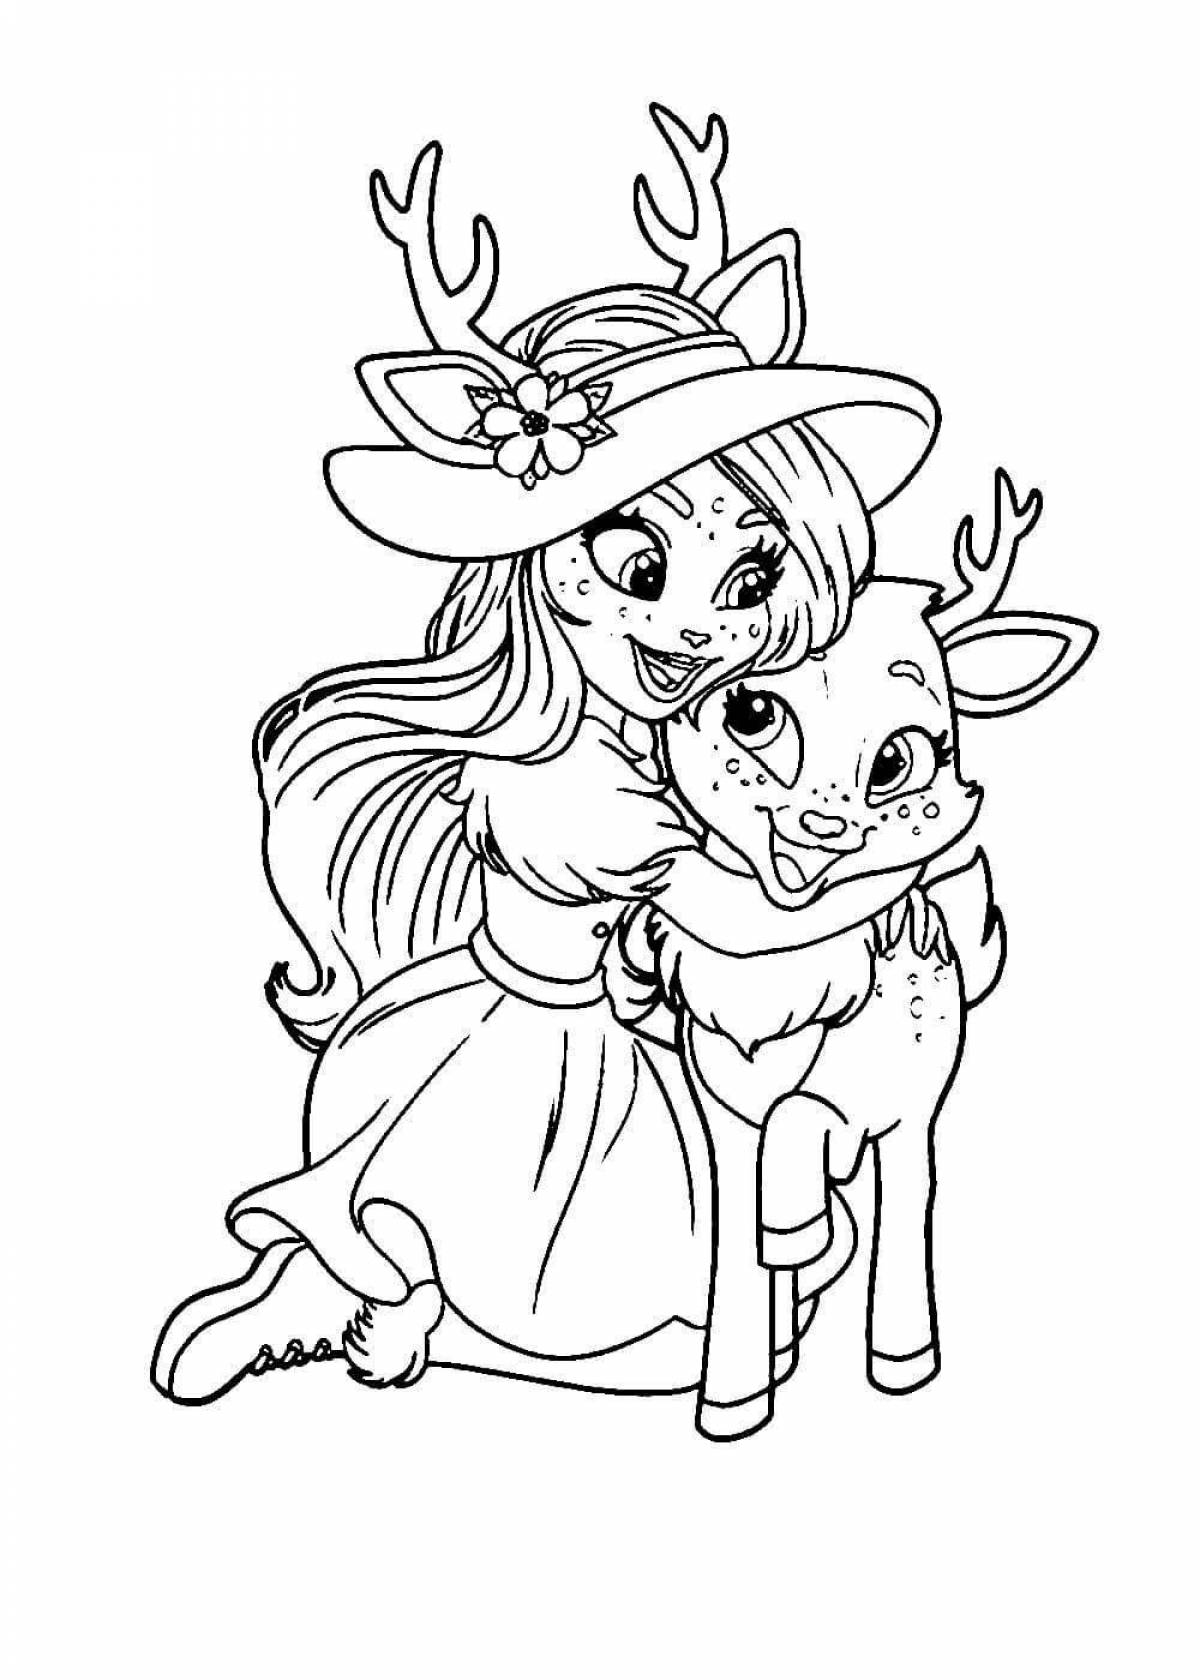 Amazing coloring pages of enchantimals and pets